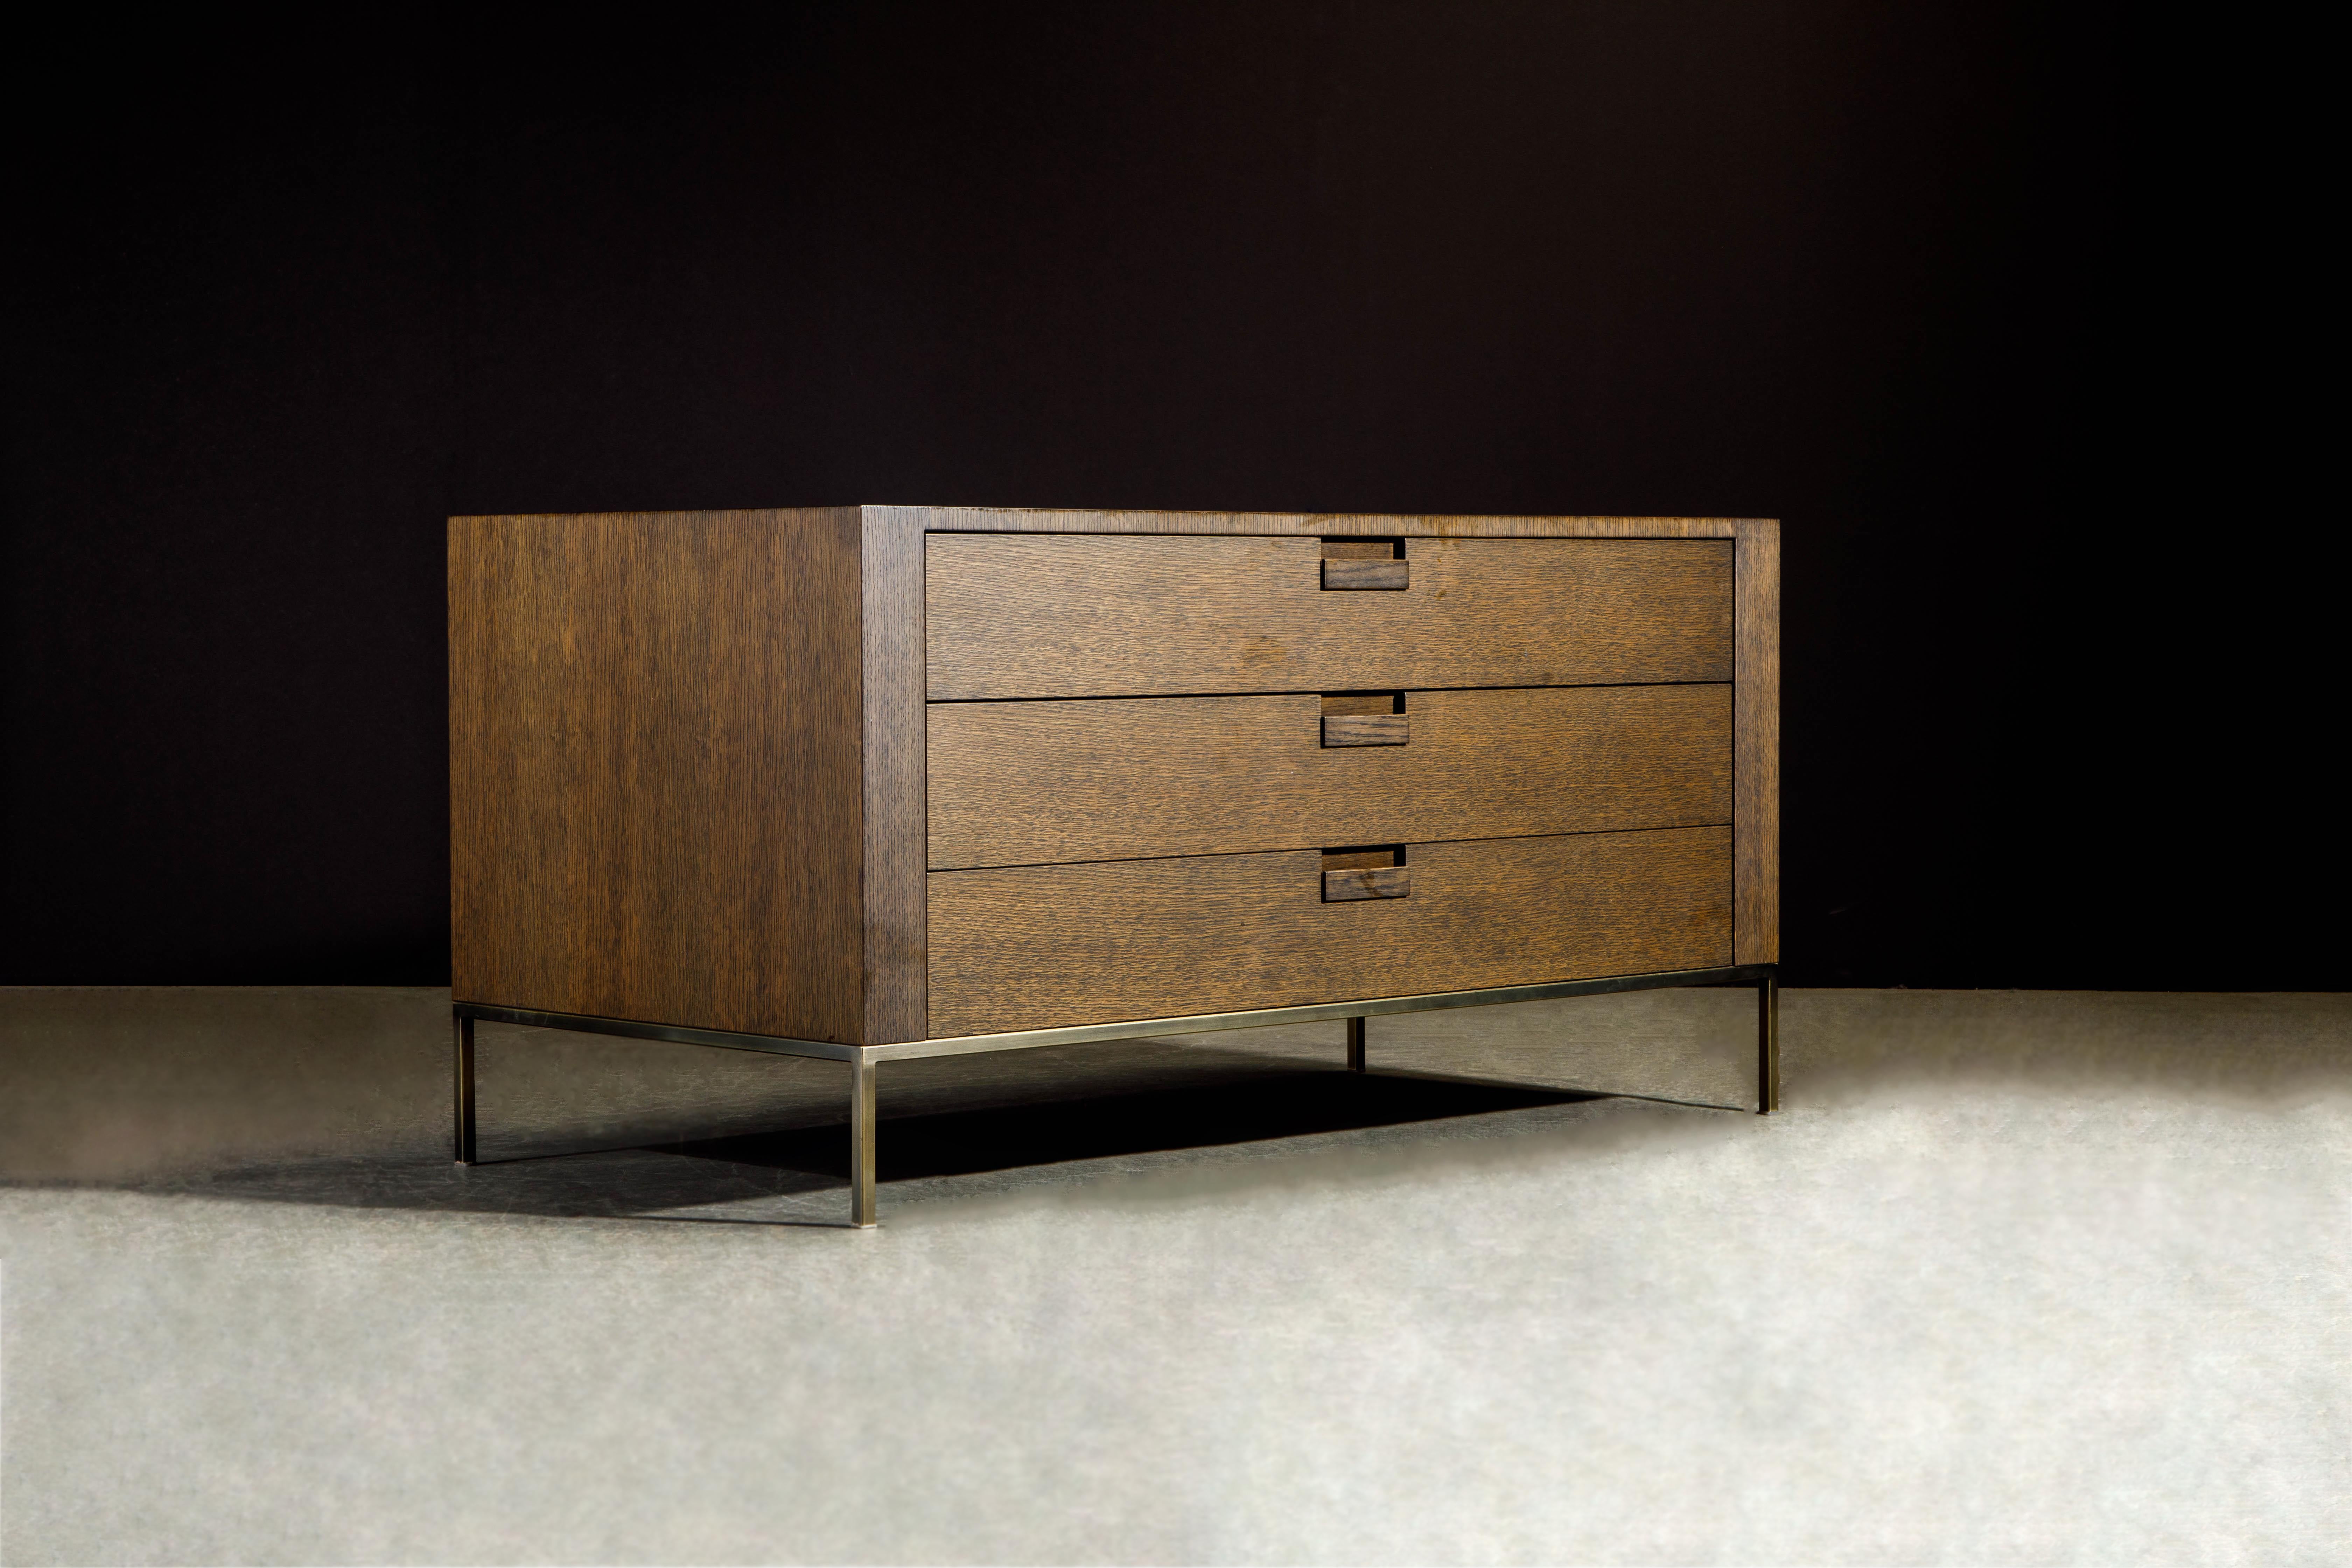 A beautiful and well made 'Apta' dresser which also functions great as a media console table by Antonio Citterio for B&B Italia. This chest of drawers features beautifully cerused wood with attractive grain and deep brown color, over a floating